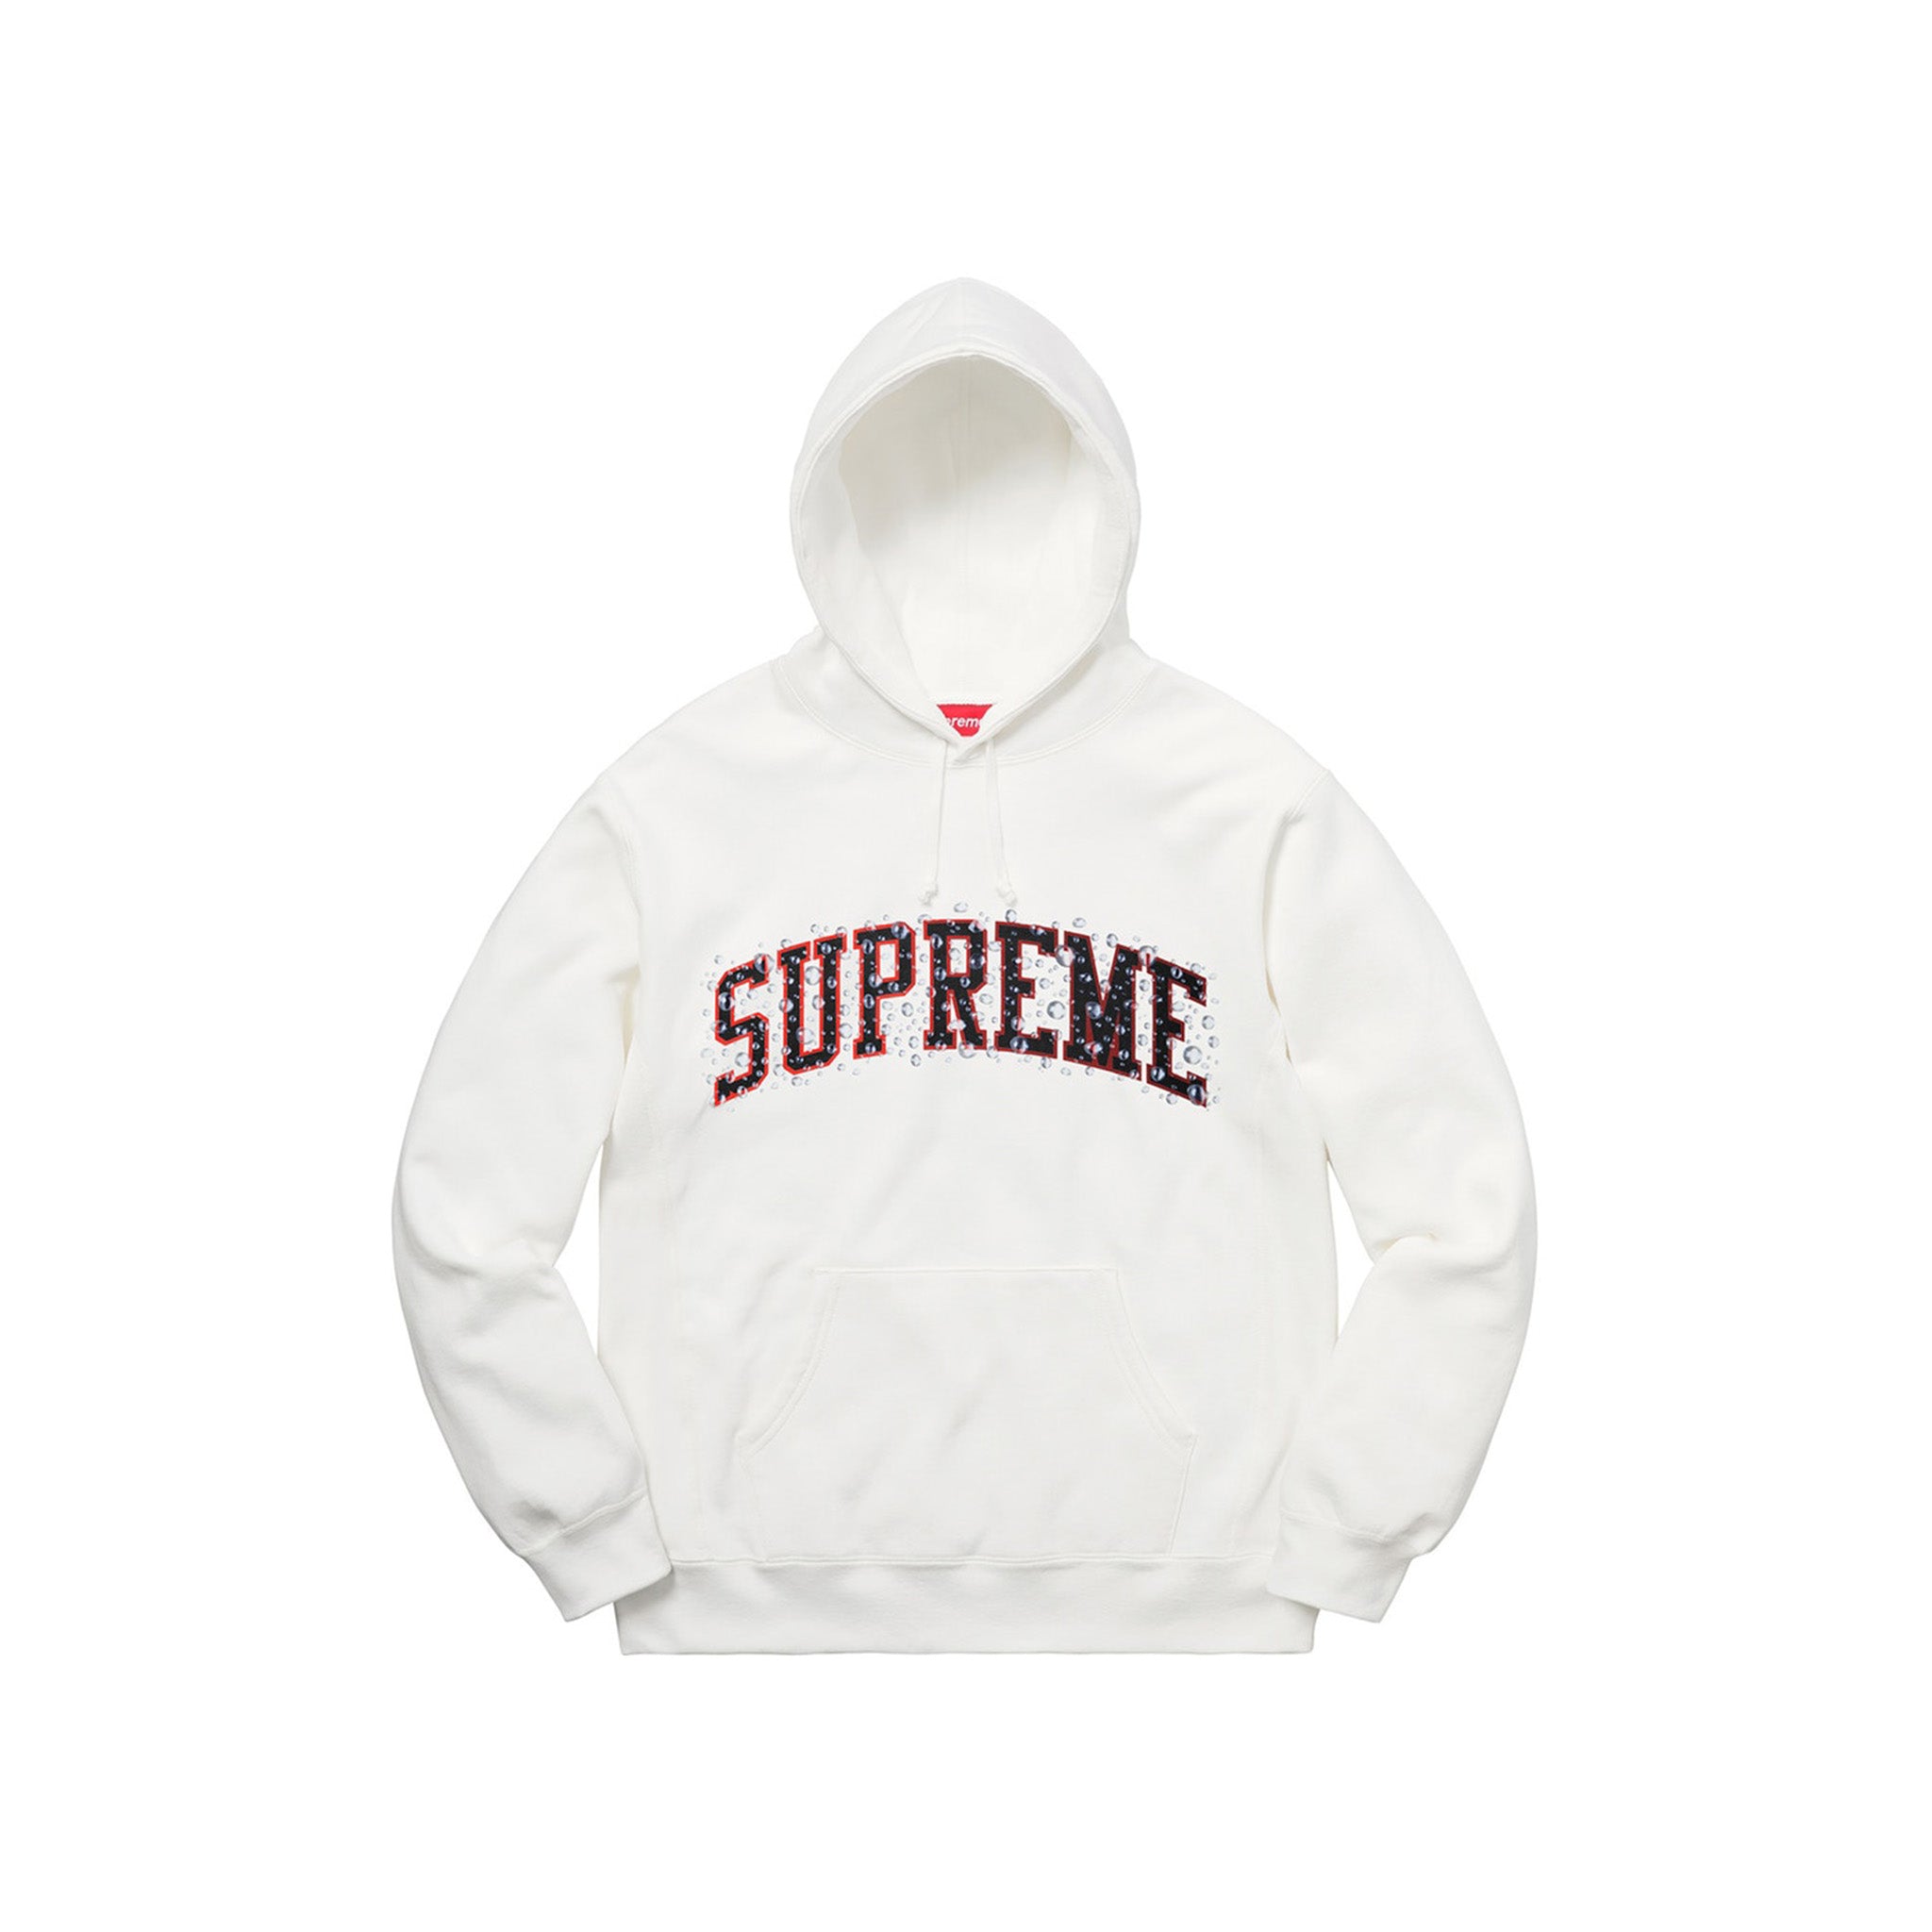 🔥$1 BANGER SNEAKER AUCTIONS🔥 - Supreme Water Arc Hooded